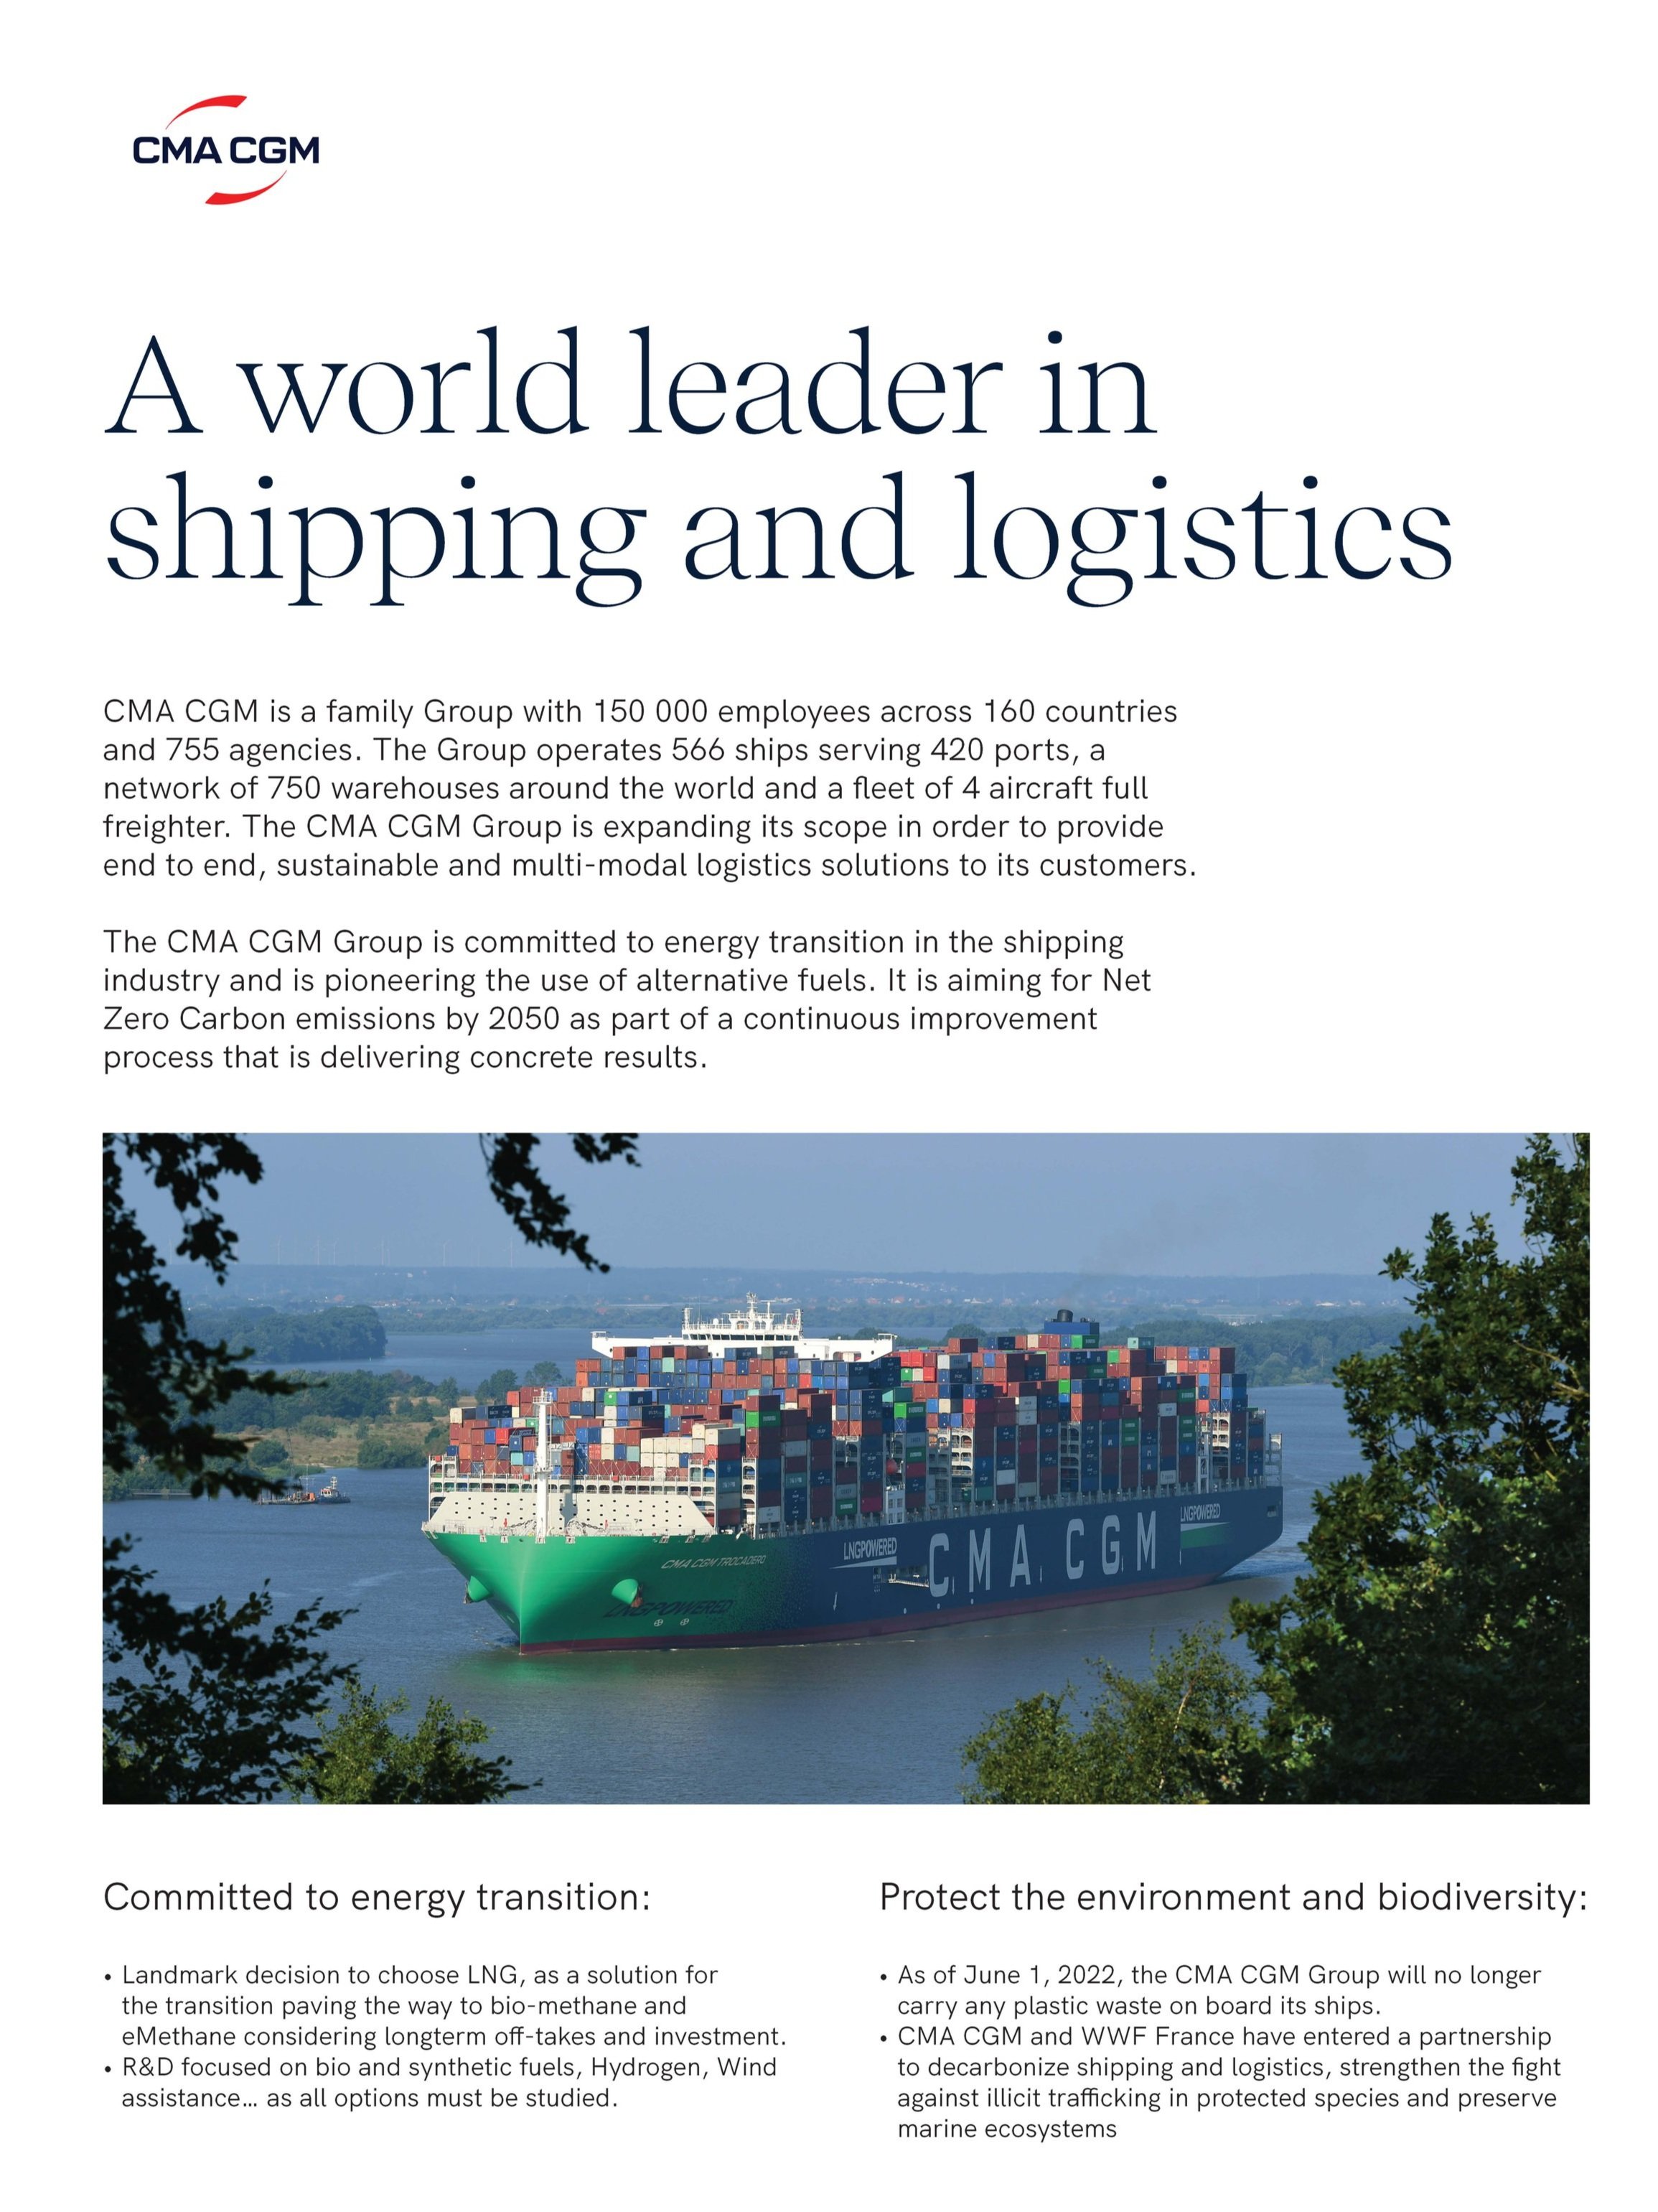 A world leader in shipping and logistics